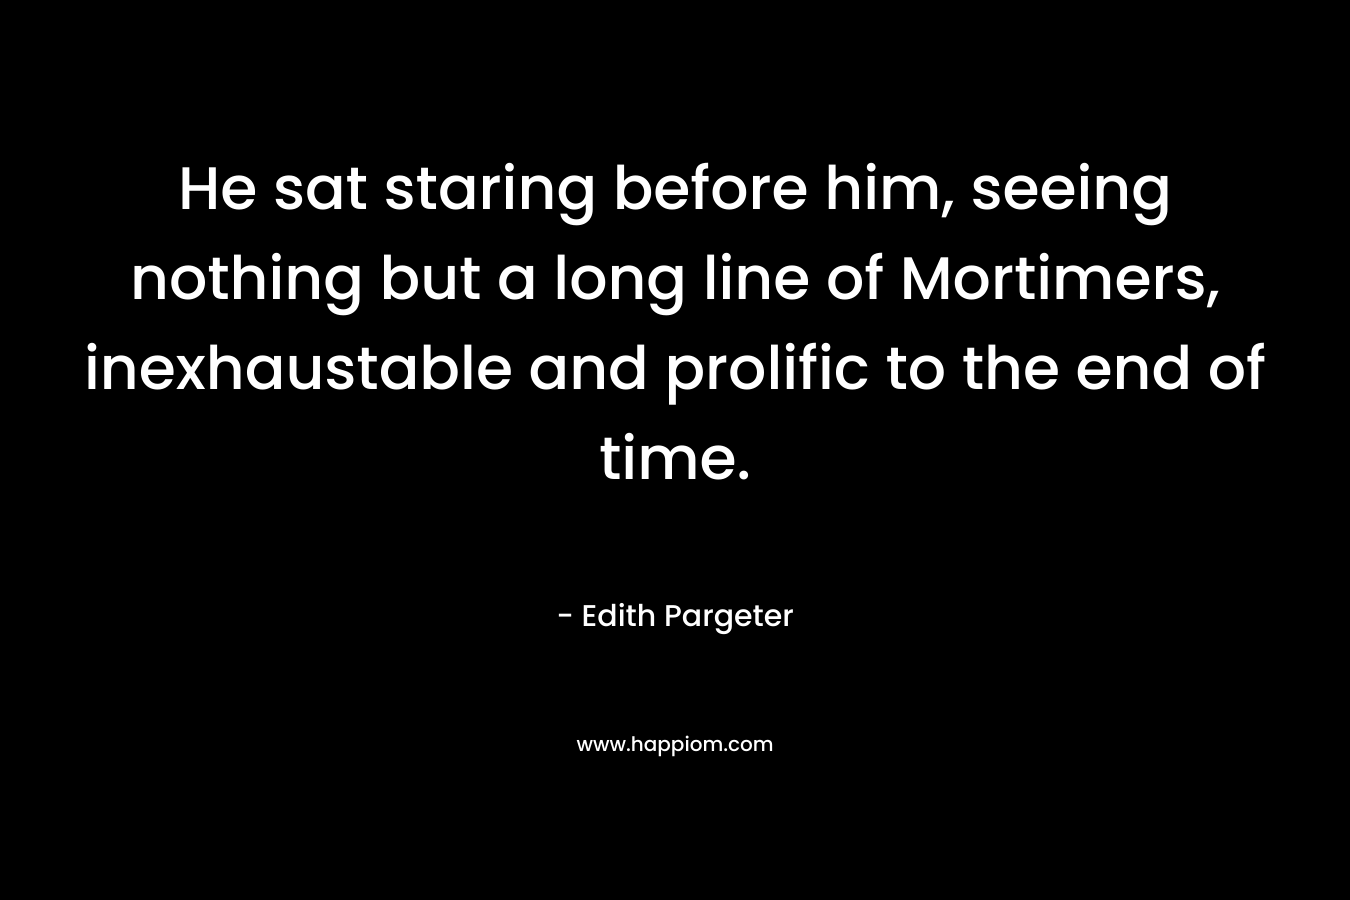 He sat staring before him, seeing nothing but a long line of Mortimers, inexhaustable and prolific to the end of time. – Edith Pargeter